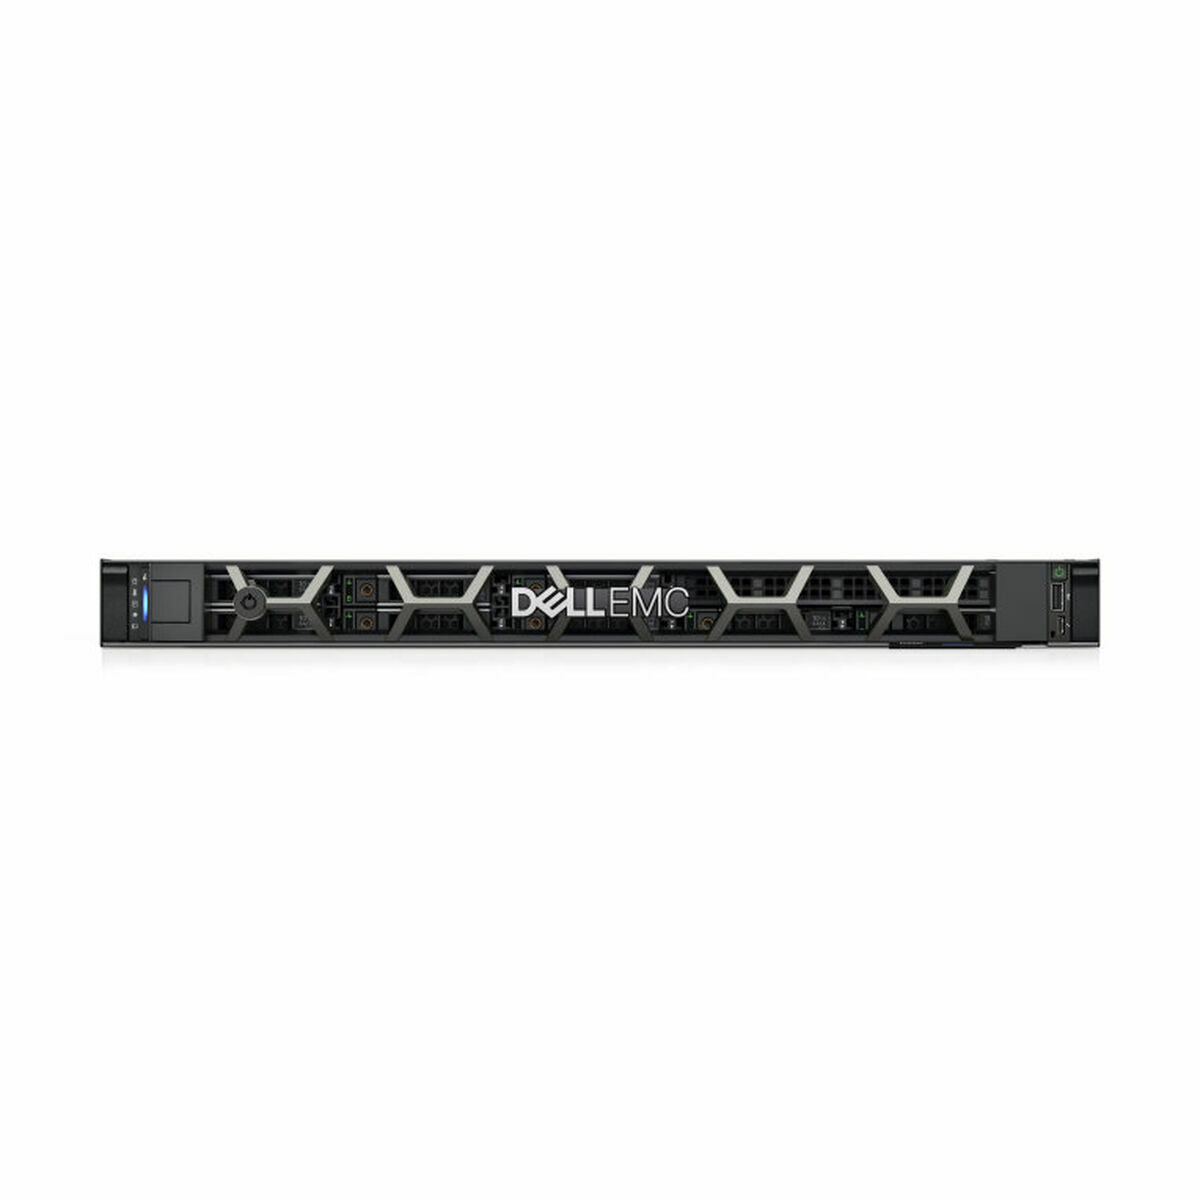 Server Dell R350 16 GB RAM 600 GB, Dell, Computing, server-dell-16-gb-ram-600-gb, Brand_Dell, category-reference-2609, category-reference-2791, category-reference-2799, category-reference-t-19685, computers / components, Condition_NEW, office, Price_+ 1000, Teleworking, RiotNook